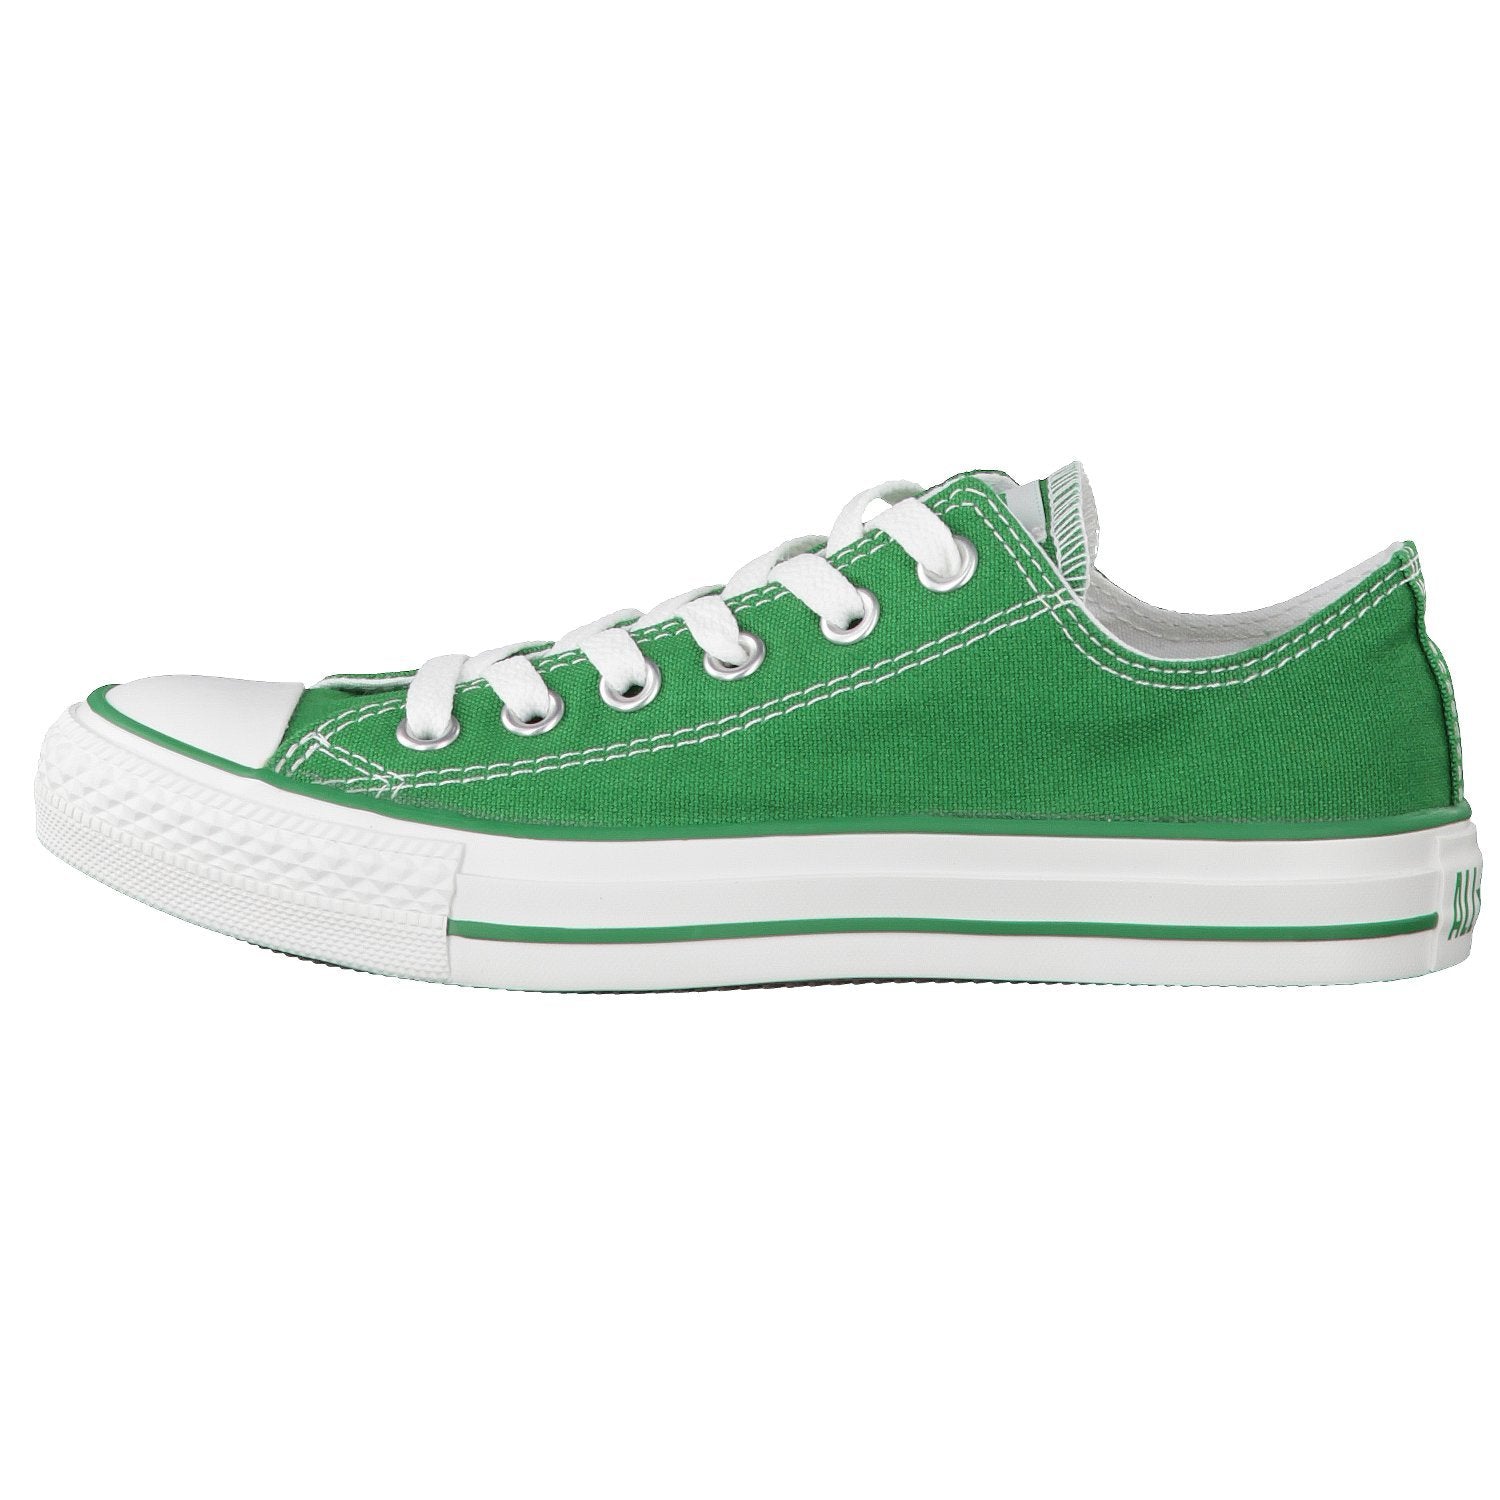 Converse Unisex Chuck Taylor All Star Sneakers